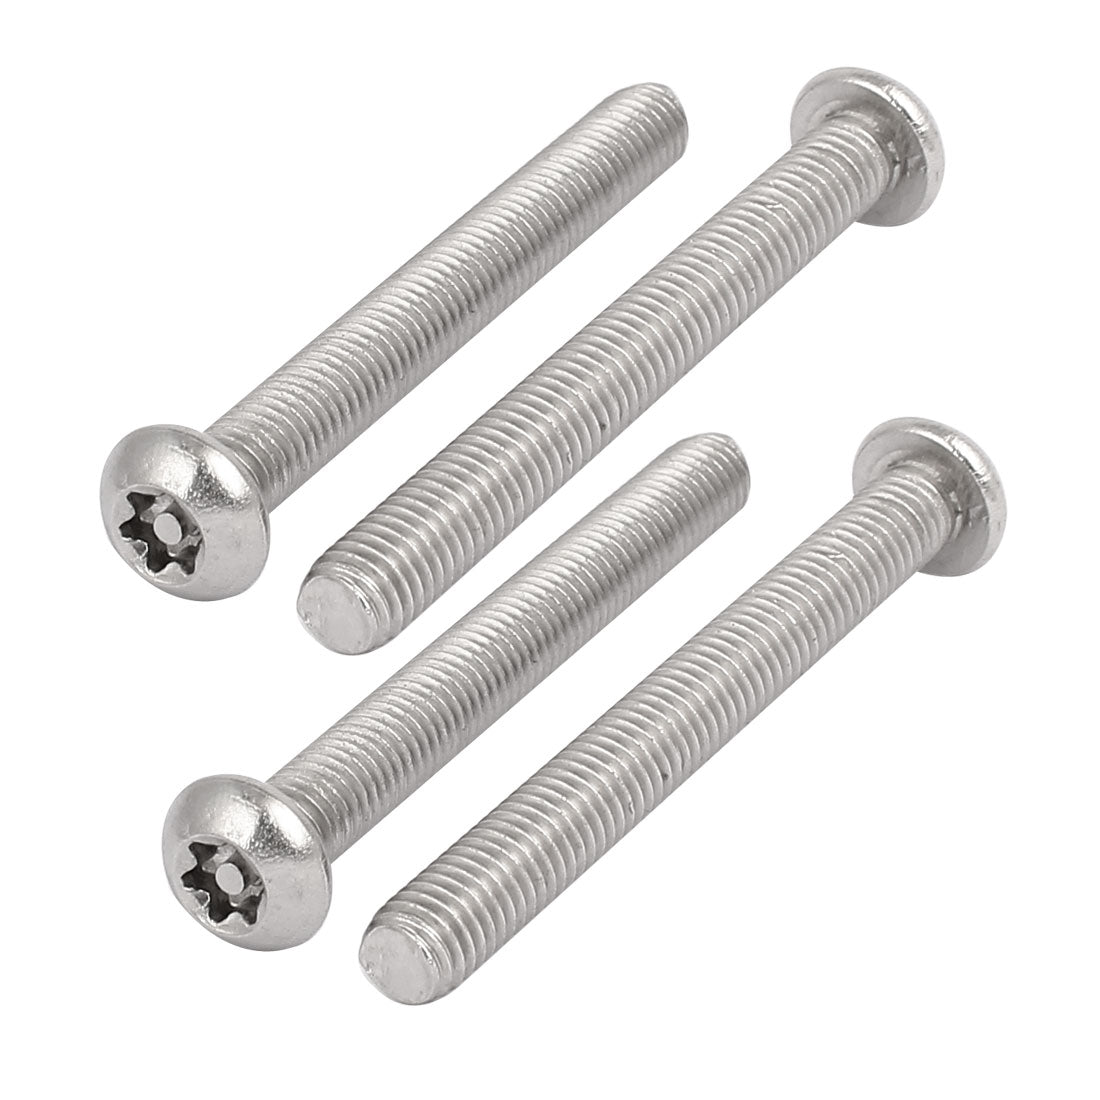 uxcell Uxcell M8x70mm 304 Stainless Steel Button Head Torx Security Machine Screws 4pcs